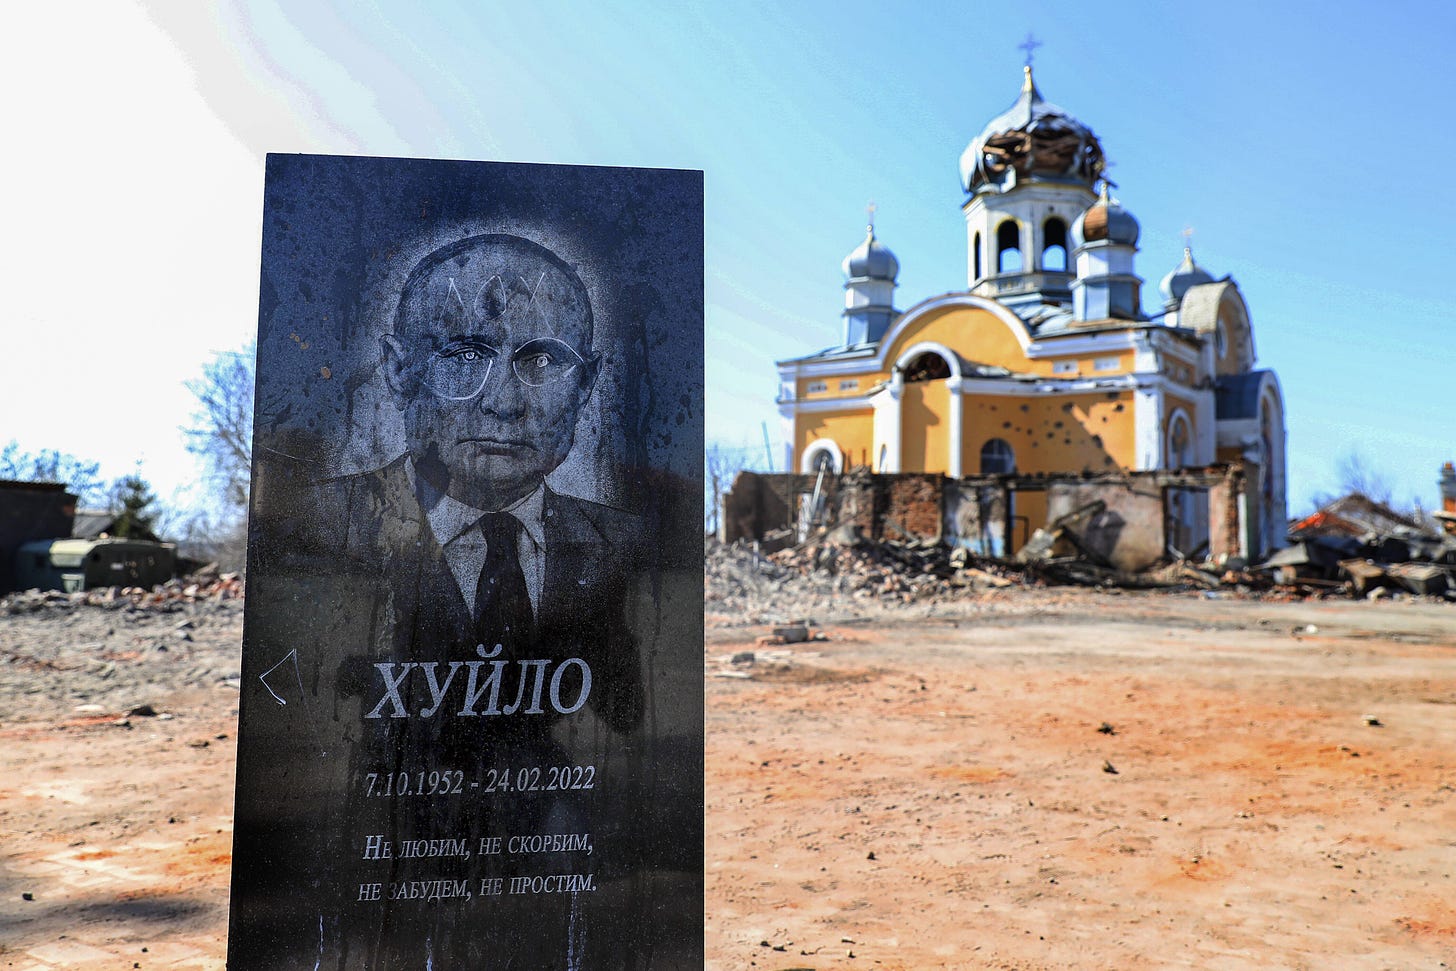 A sign excoriating Russian President Vladimir Putin for his invasion of Ukraine is seen outside a partially destroyed church in Malyn, Ukraine, on March 22. (Nuno Veiga/EPA-EFE/REX/Shutterstock)